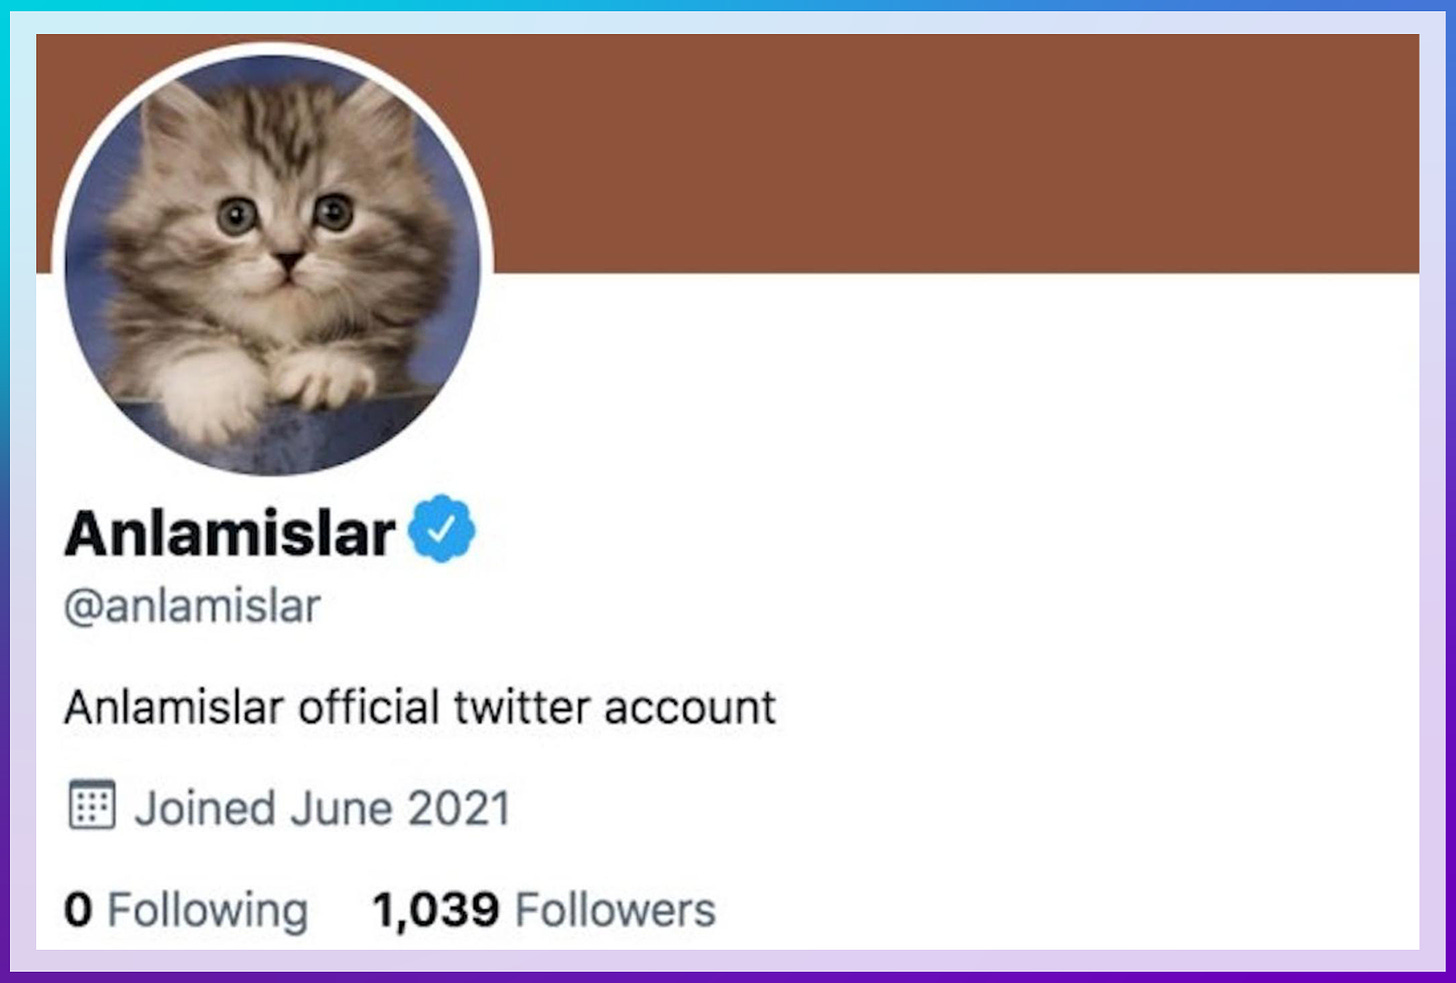 Image: Fake User Profile of Cat Verified By Twitter with Blue Check. Color: Blue. Direction: Left to Right. Anlamislar @anlamislar Anslamislar official twitter account. Joined June 2021. 0 Following. 1,039 Followers.